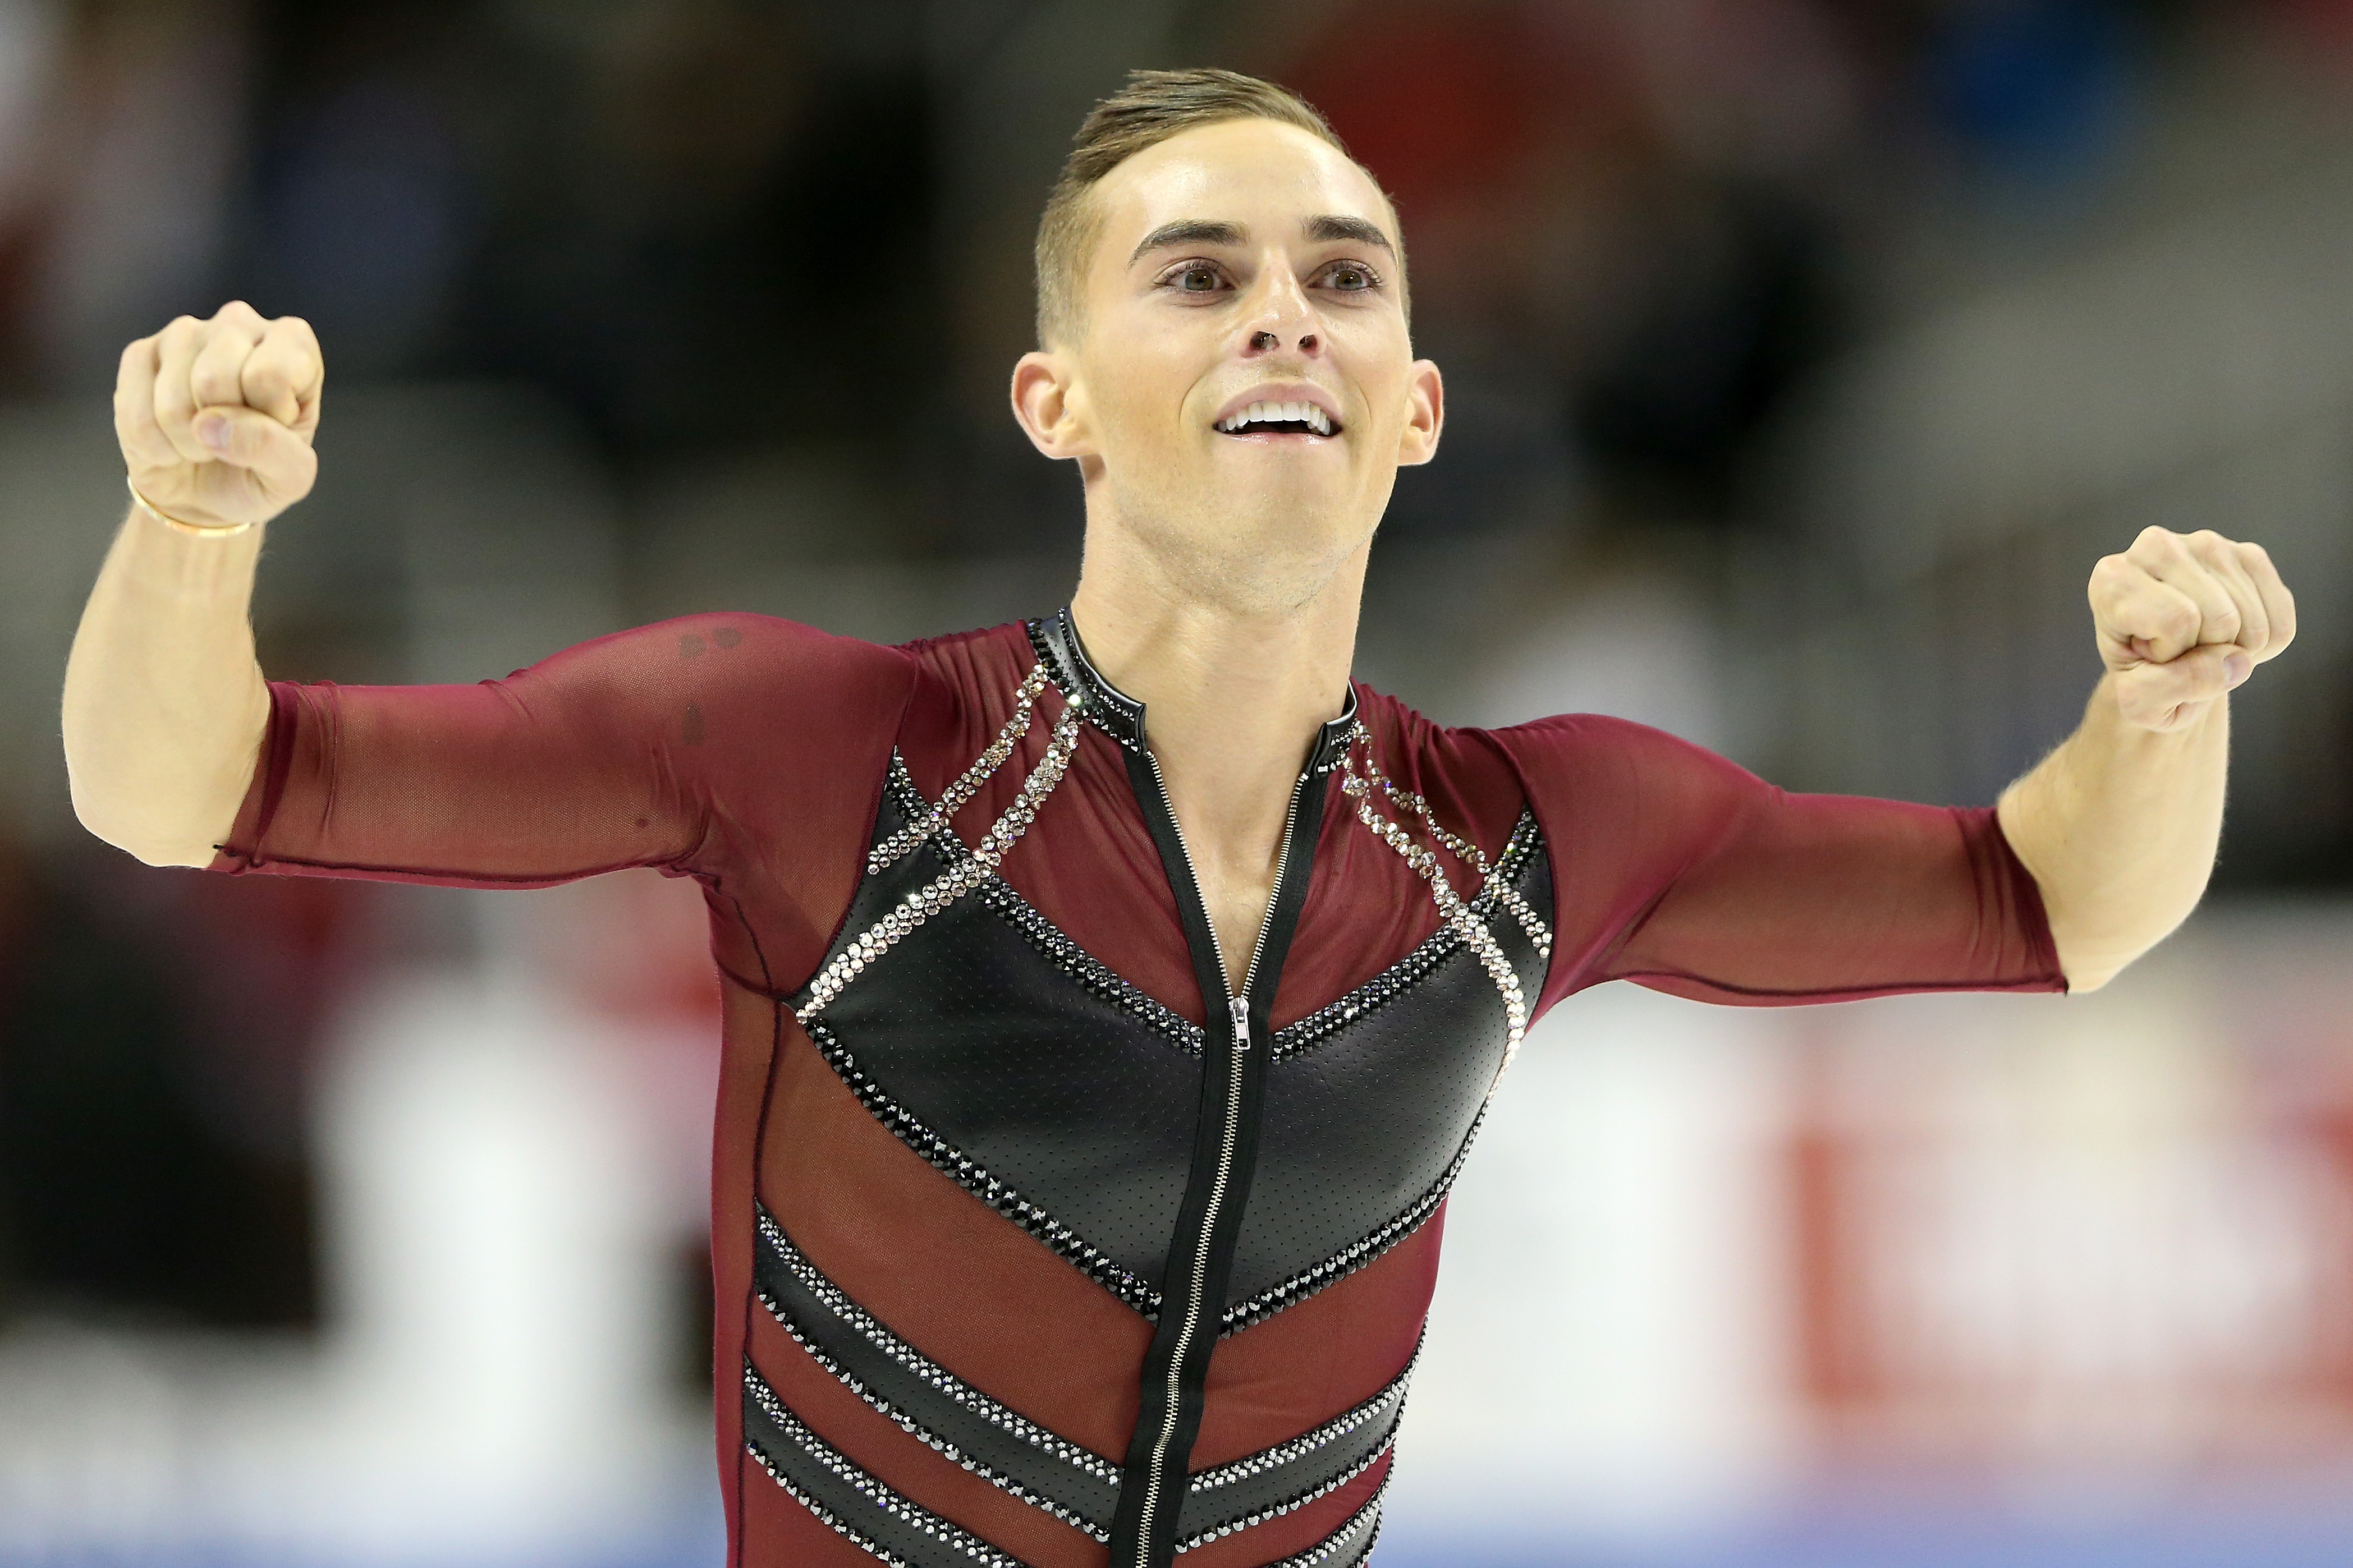 Adam Rippon reacts at the end of his program during the Men's Short Program during the 2018 Prudential U.S. Figure Skating Championships at the SAP Center on January 4, 2018 in San Jose, California. (Matthew Stockman—Getty Images)